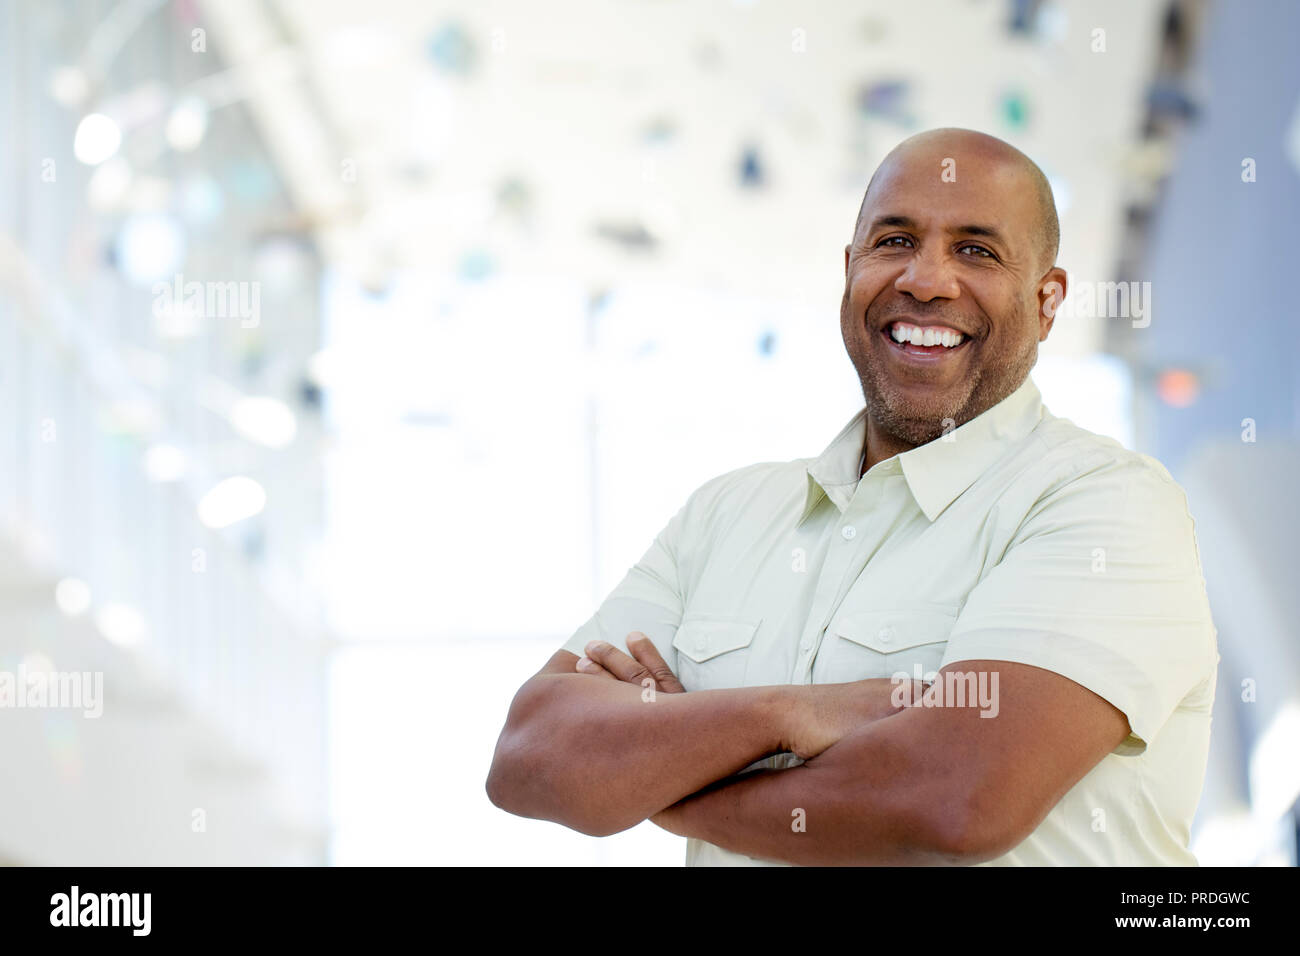 African American man smiling. Banque D'Images